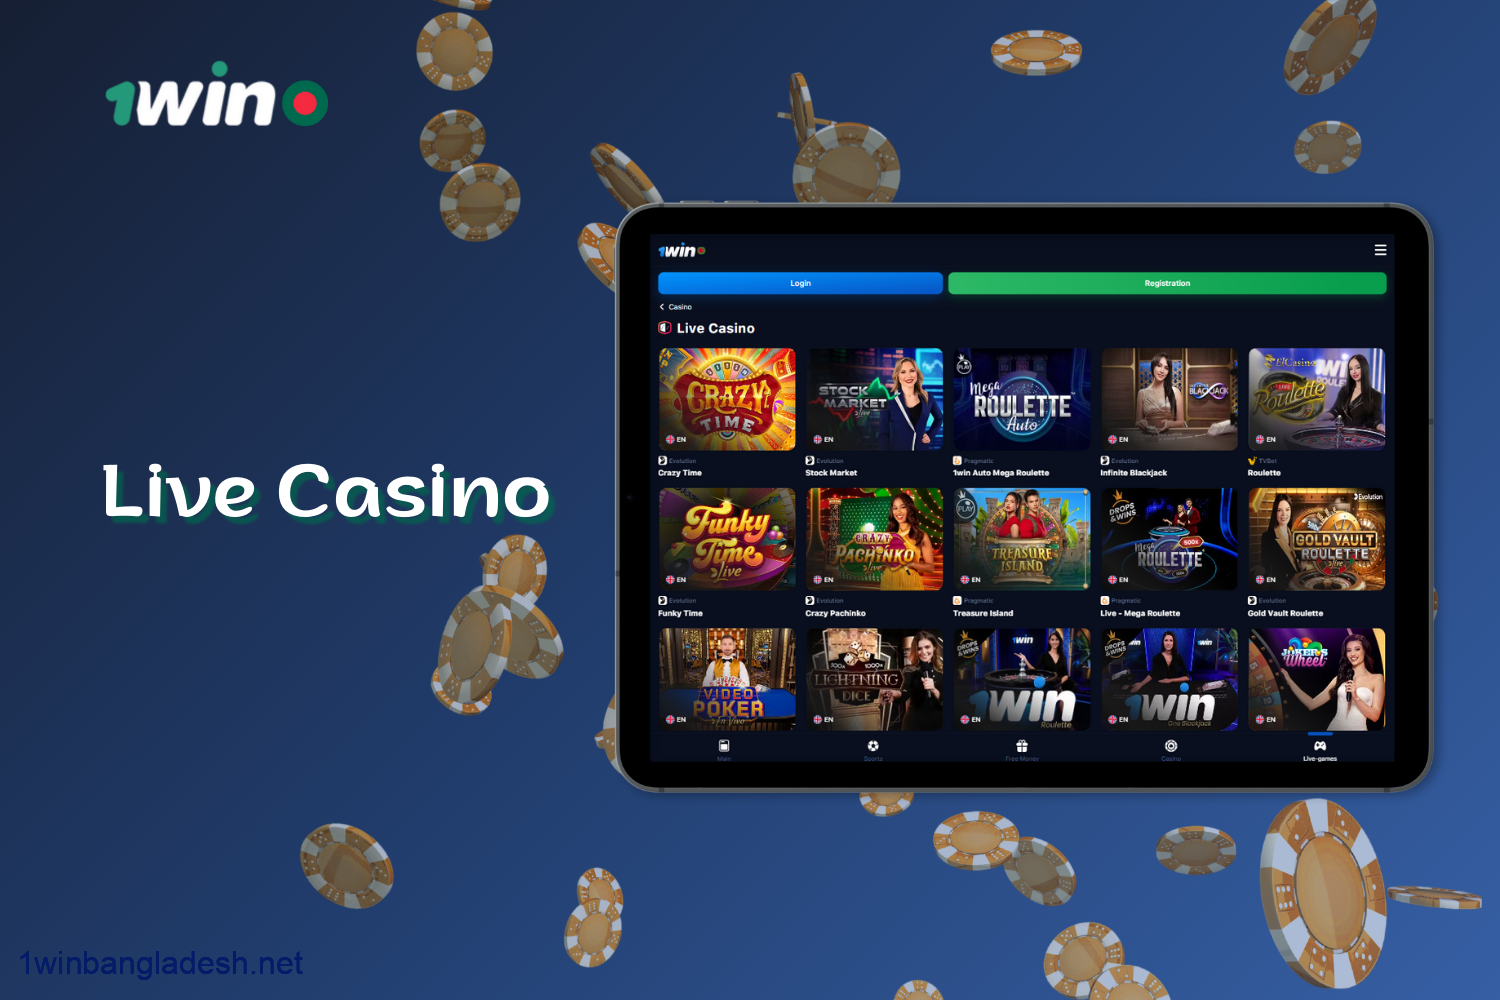 1win offers Bangladesh players a wide range of Live Dealers Casino software in the Live Casino section